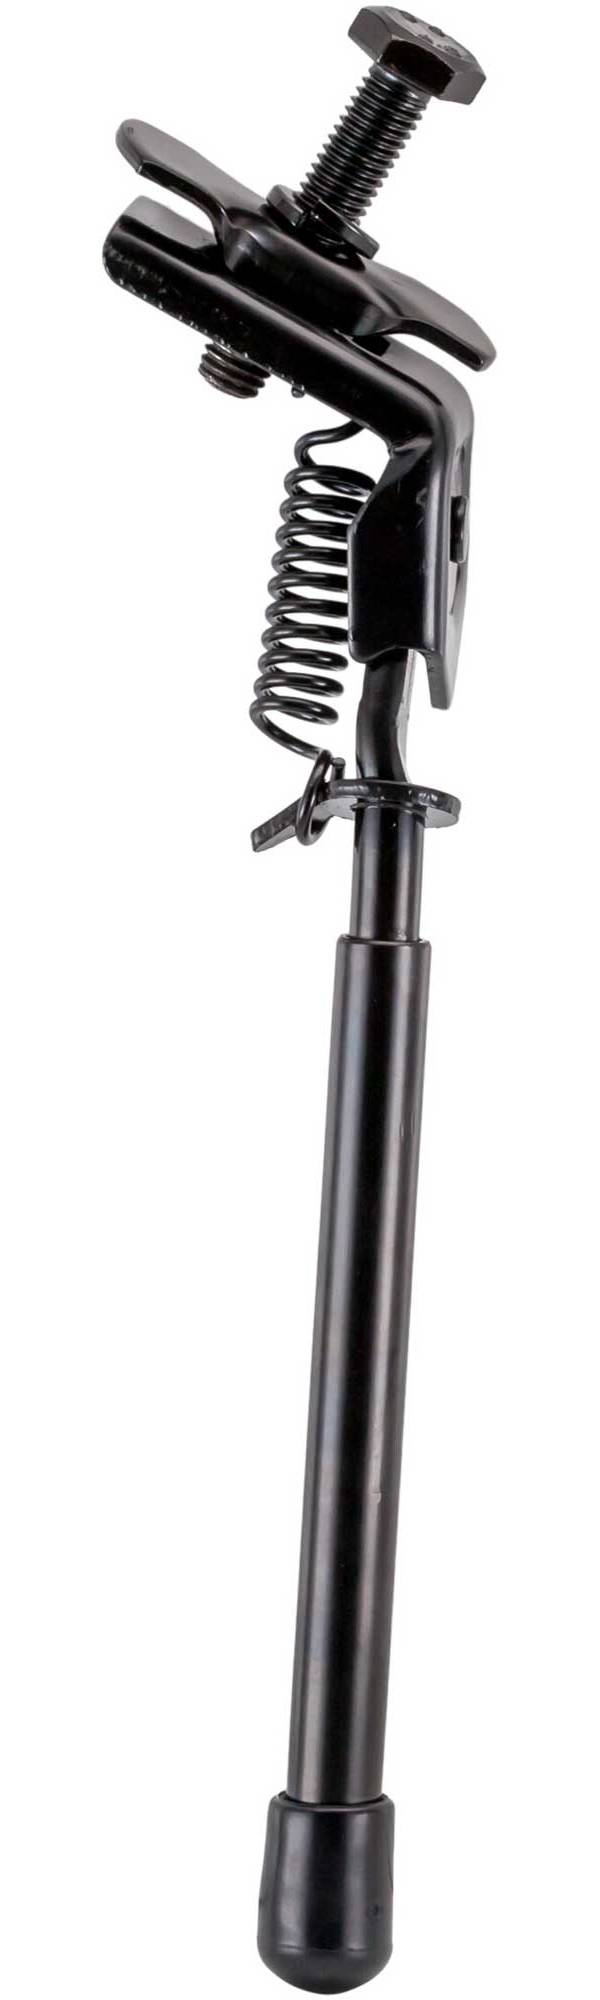 Charge Center Spring Bike Kickstand product image